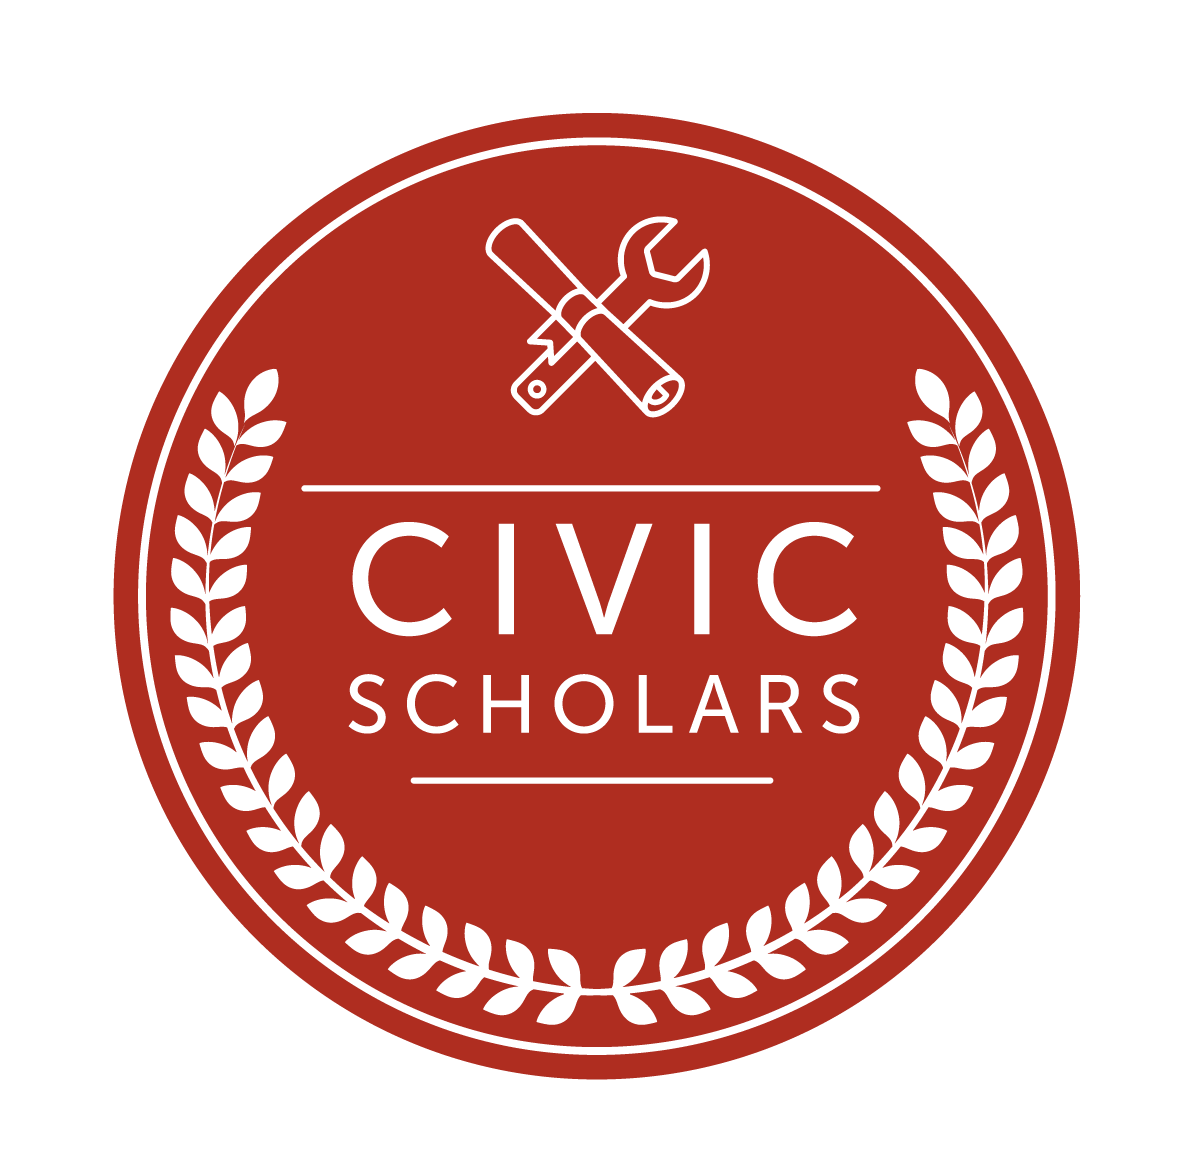 Study.com's Civic Scholars program gives employees of city governments and civic organizations the opportunity to earn a no-cost bachelor's degree.